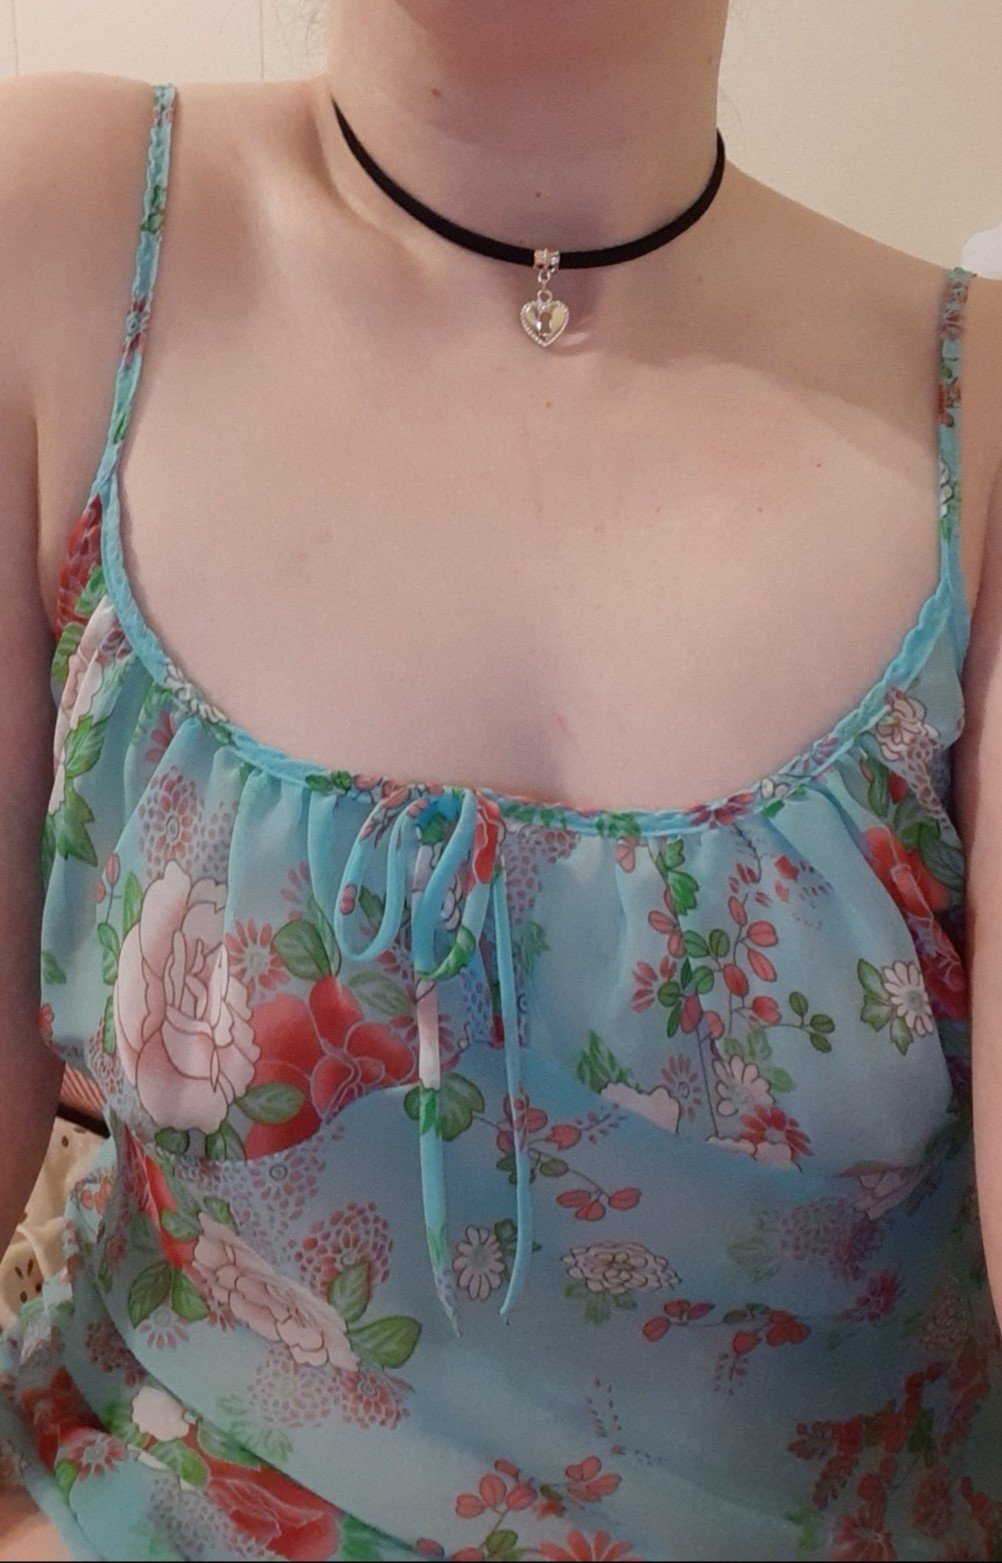 Photo by WulfsKitten with the username @WulfsKitten, who is a star user,  June 14, 2020 at 6:43 AM. The post is about the topic Sexy Lingerie and the text says 'new nightie *Kitten'